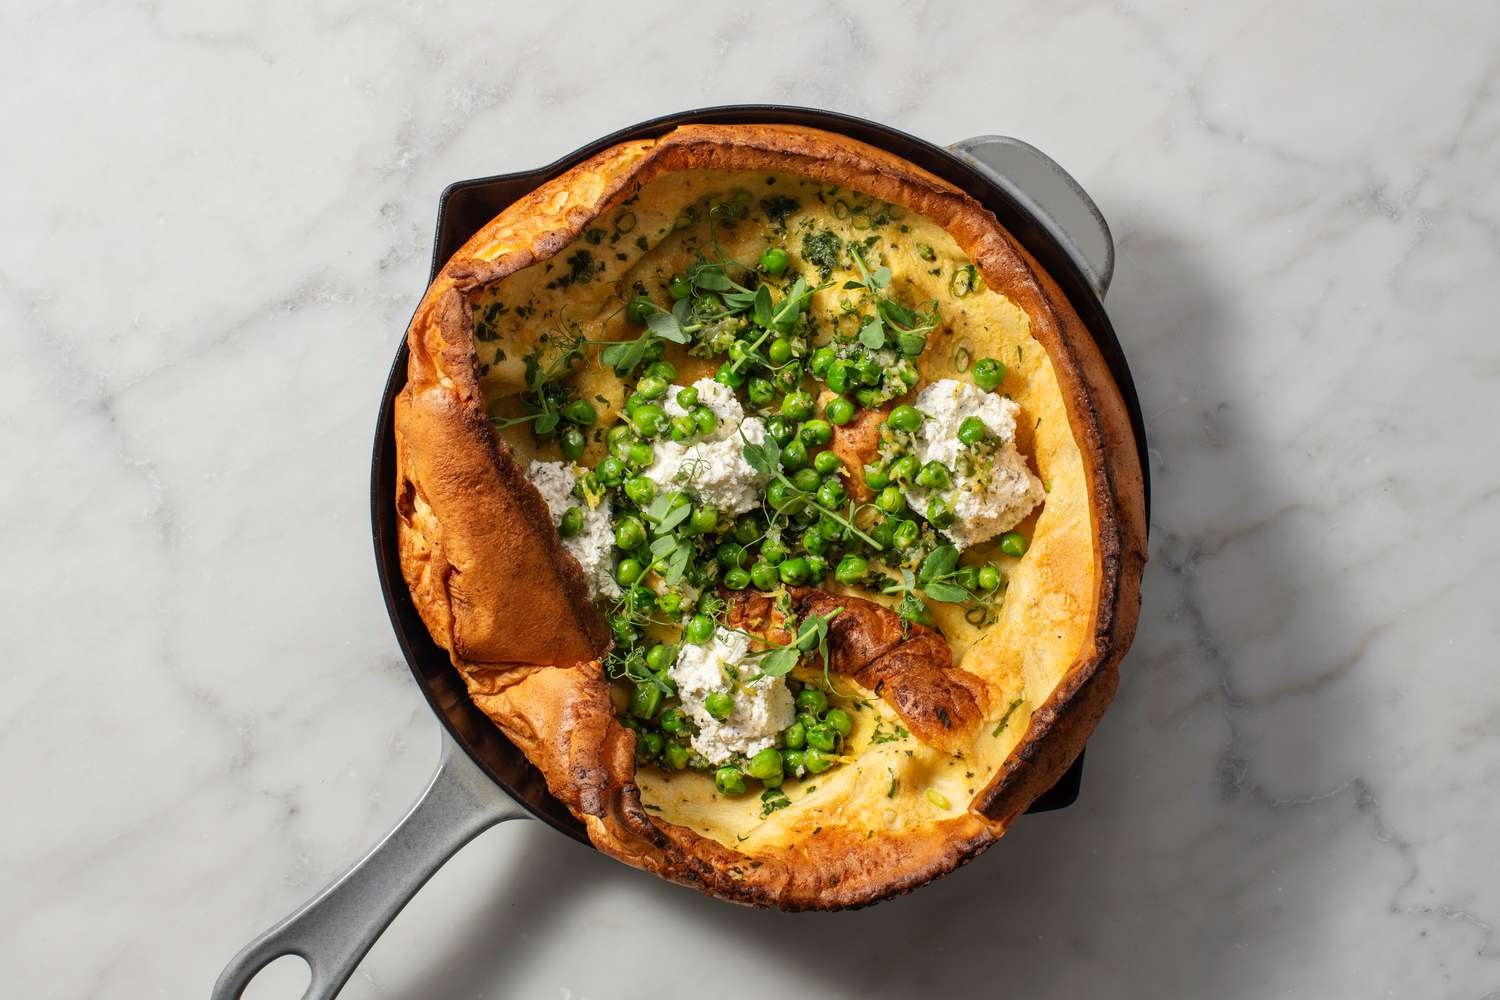 A Boursin and peas Dutch Baby garnished with parsley and pea shoots